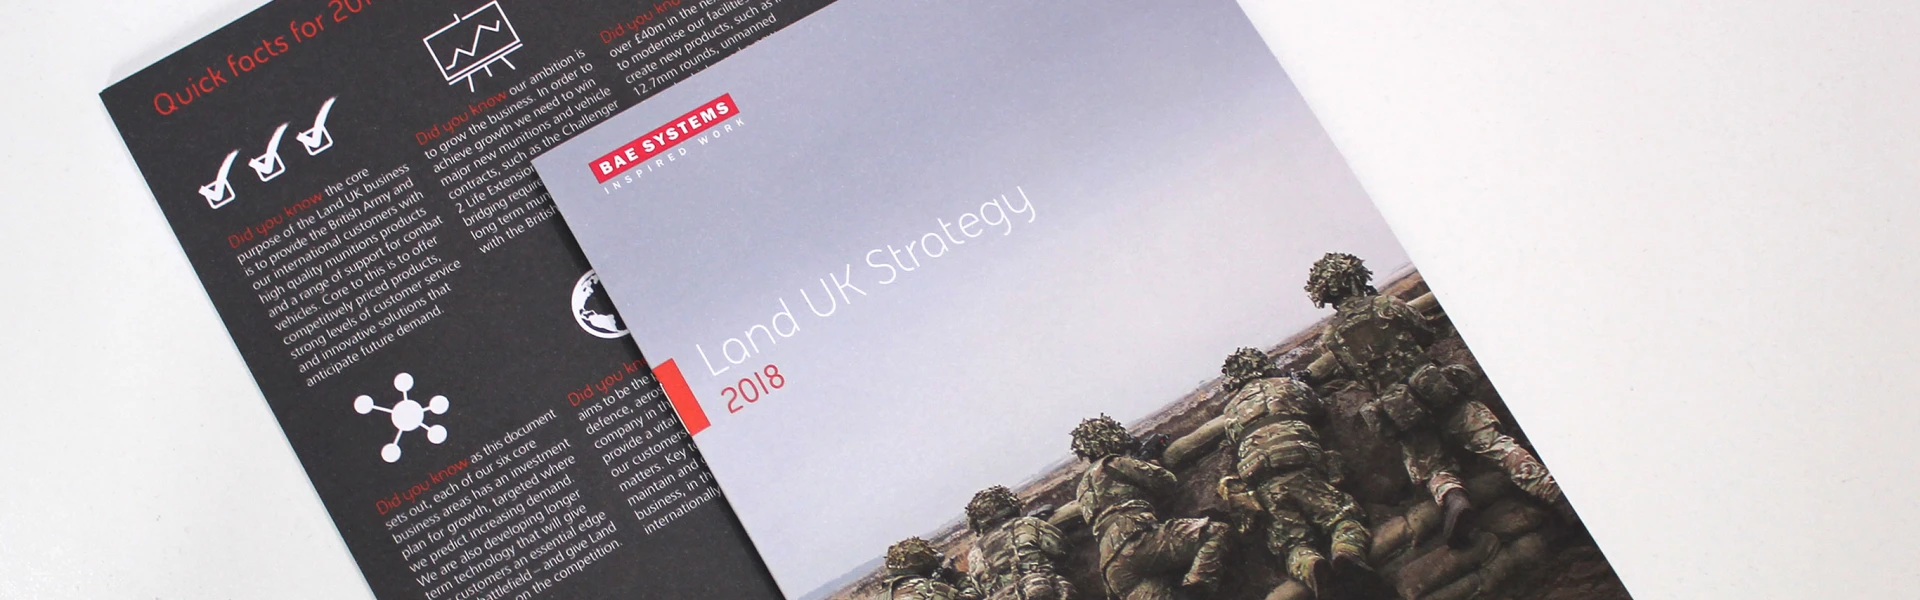 Bae Systems Land Uk Strategy 2018